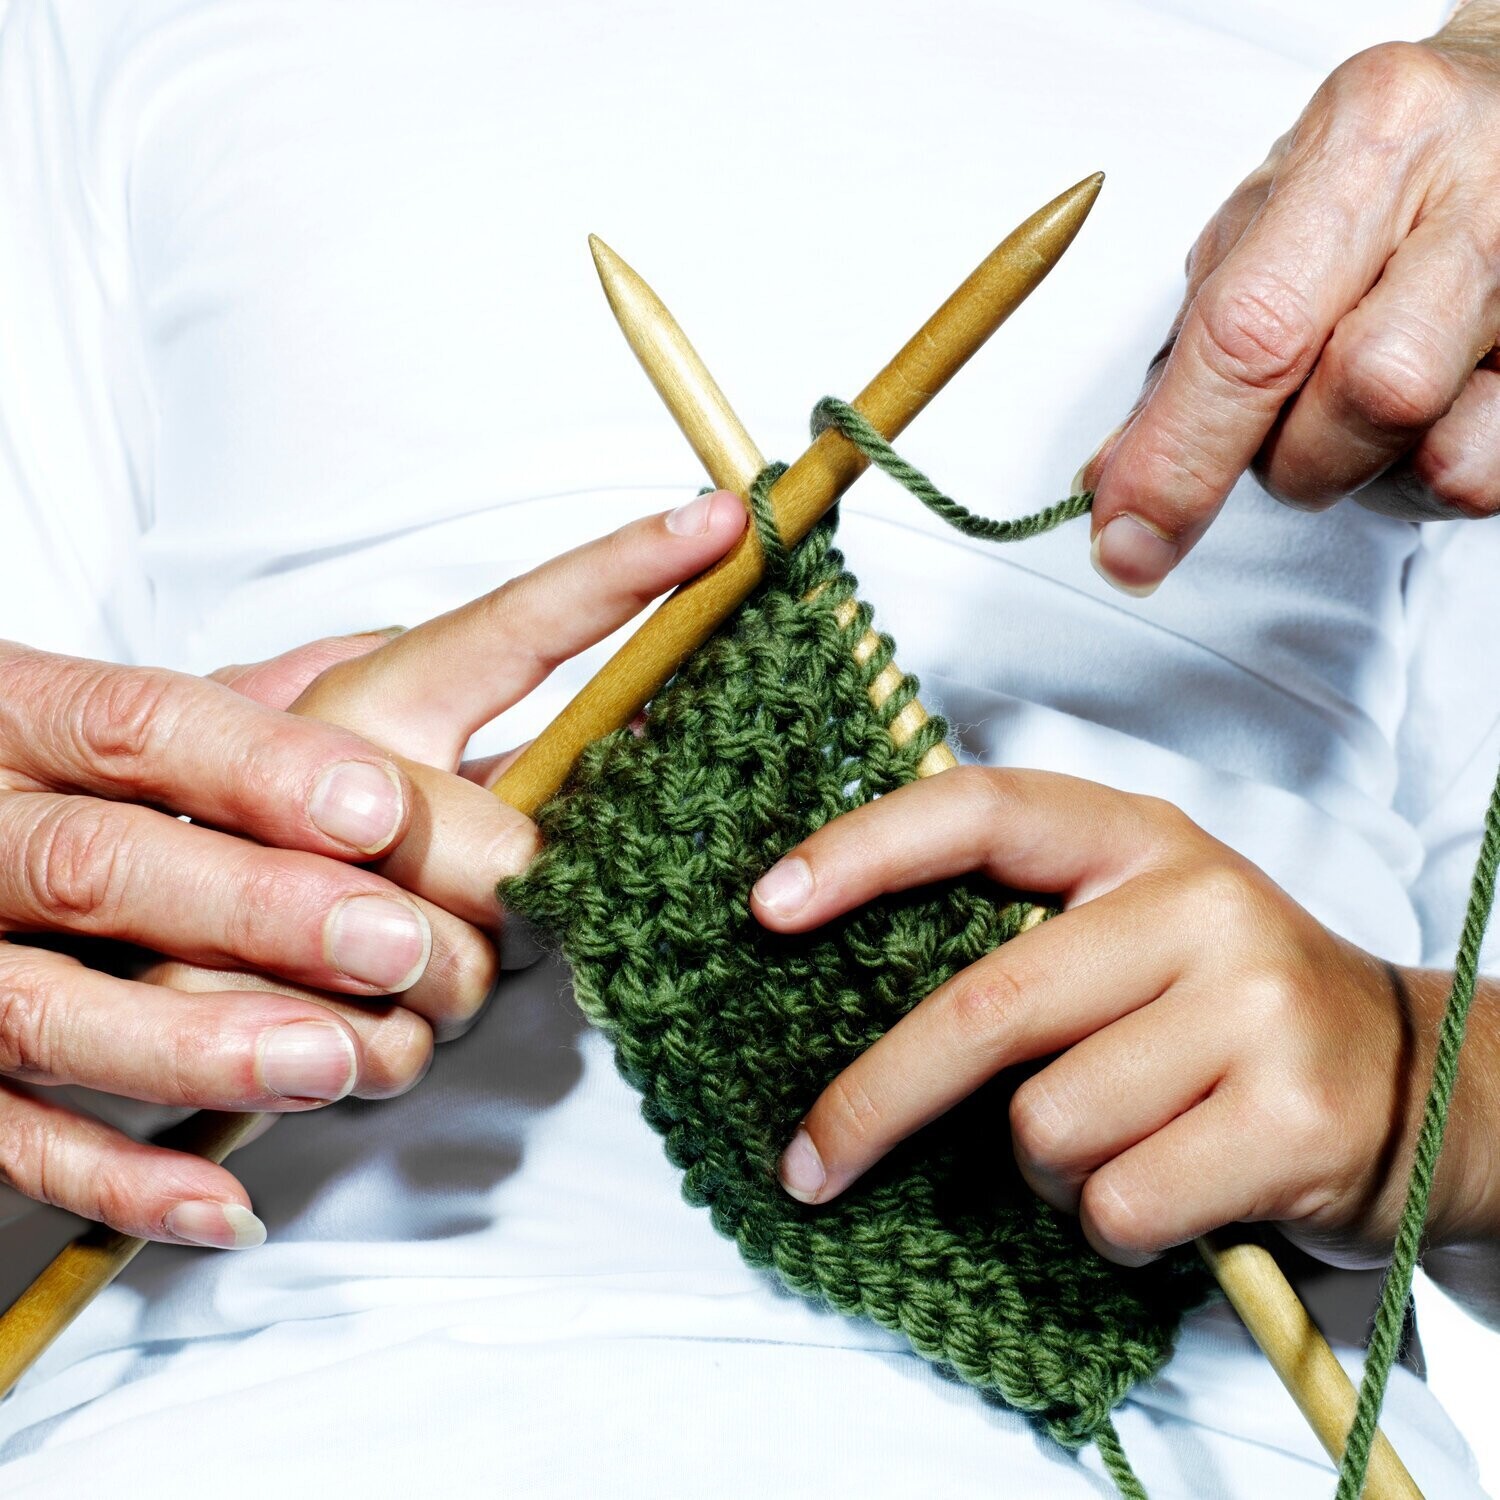 Weekly Knit & Natter (FREE) :-
Tuesdays @ My Time Cafe N13, 10-11.30am